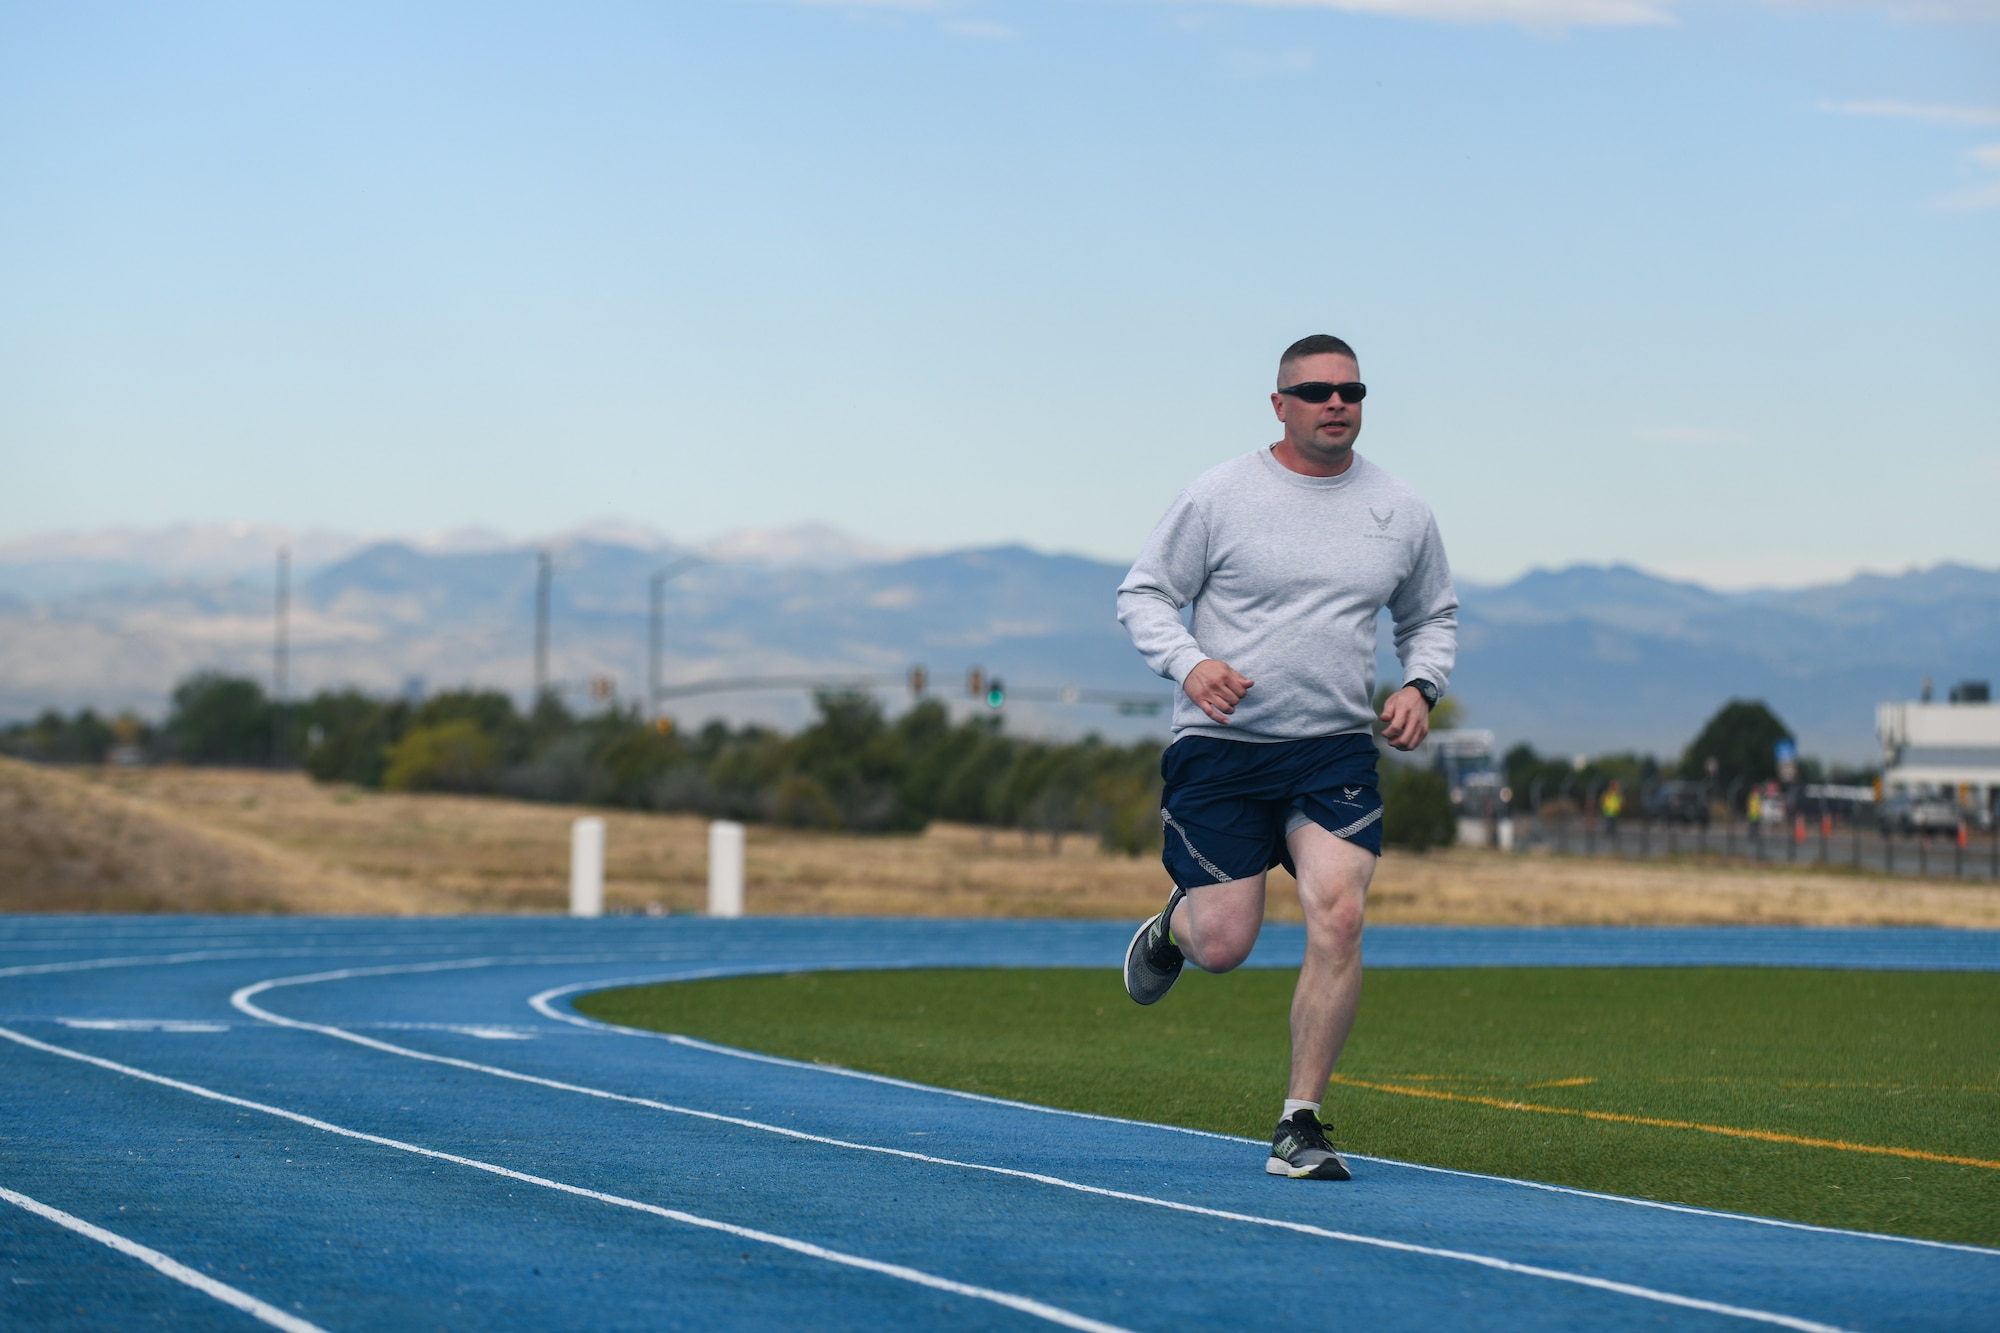 Senior Master Sgt. Kevin Ryan Jr., 11th Space Warning Squadron superintendent, runs his last lap of the one mile run at the track on Buckley Air Force Base, Colo.